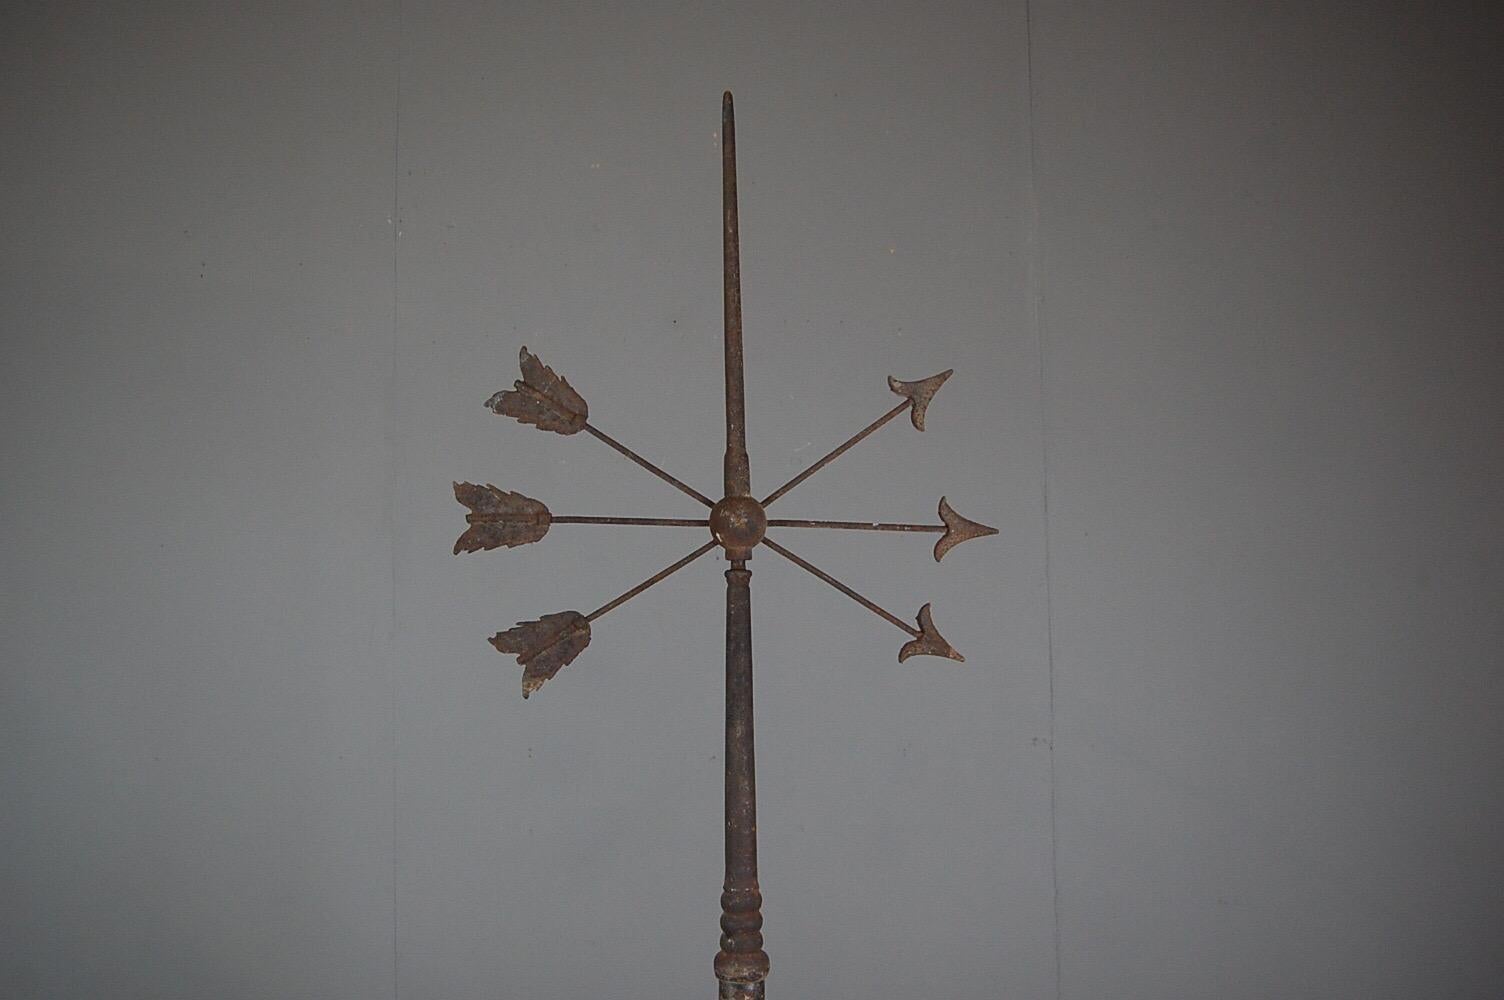 Large 19th century wrought and cast iron weathervane finial, a trio of crossing arrows, wonderful dramatic architectural piece, untouched weathered surface.
Dimensions: 66cm x 163cm x 23cm.